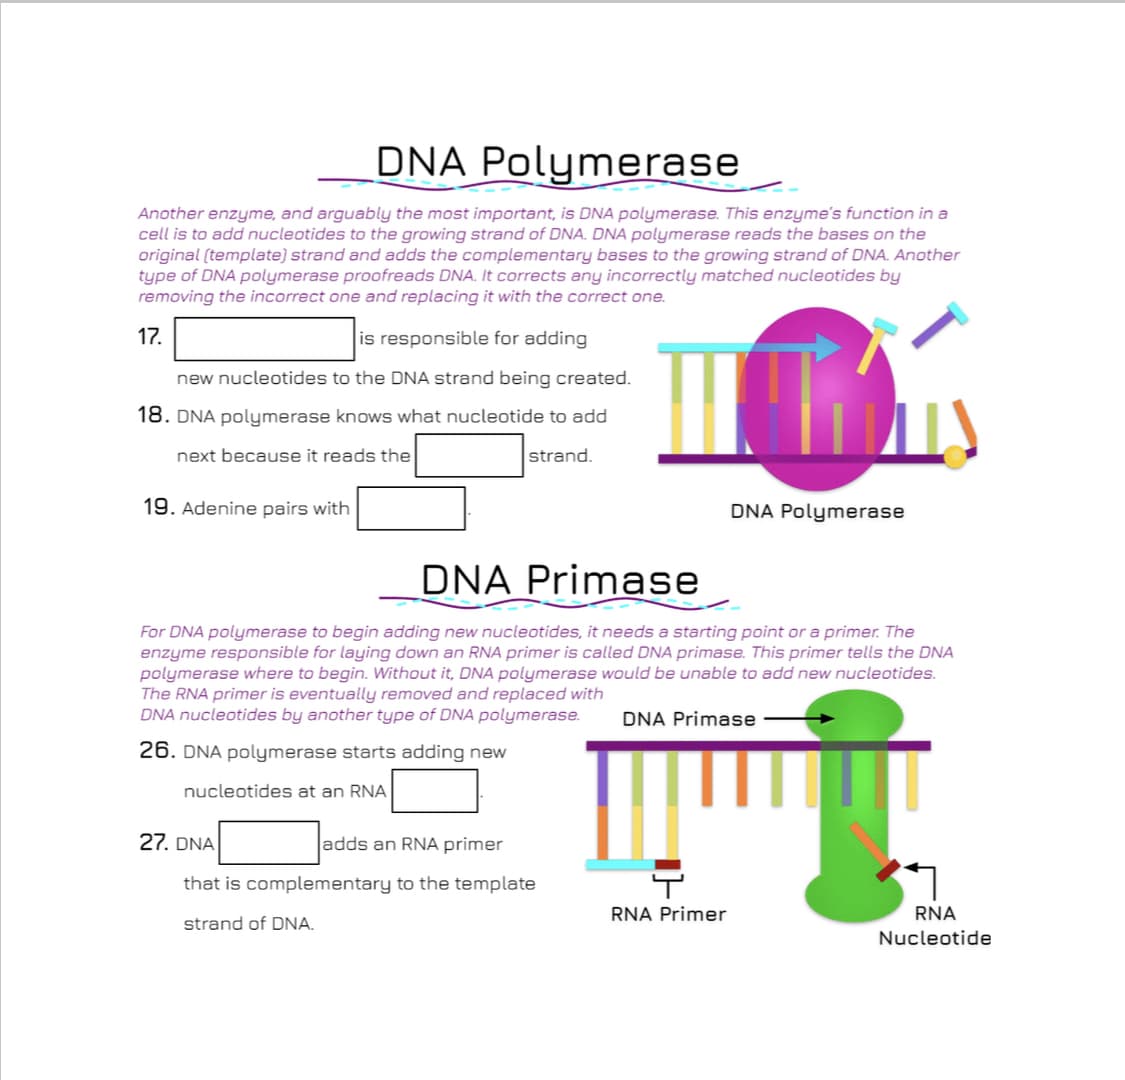 DNA Polymerase
Another enzyme, and arguably the most important, is DNA polymerase. This enzyme's function in a
cell is to add nucleotides to the growing strand of DNA. DNA polymerase reads the bases on the
original (template) strand and adds the complementary bases to the growing strand of DNA. Another
type of DNA polymerase proofreads DNA. It corrects any incorrectly matched nucleotides by
removing the incorrect one and replacing it with the correct one.
17.
is responsible for adding
new nucleotides to the DNA strand being created.
18. DNA polymerase knows what nucleotide to add
next because it reads the
strand.
19. Adenine pairs with
DNA Polymerase
DNA Primase
For DNA polymerase to begin adding new nucleotides, it needs a starting point or a primer. The
enzyme responsible for laying down an RNA primer is called DNA primase. This primer tells the DNA
polymerase where to begin. Without it, DNA polymerase would be unable to add new nucleotides.
The RNA primer is eventually removed and replaced with
DNA nucleotides by another type of DNA polymerase.
DNA Primase
26. DNA polymerase starts adding new
nucleotides at an RNA
27. DNA
adds an RNA primer
that is complementary to the template
RNA Primer
RNA
strand of DNA.
Nucleotide
